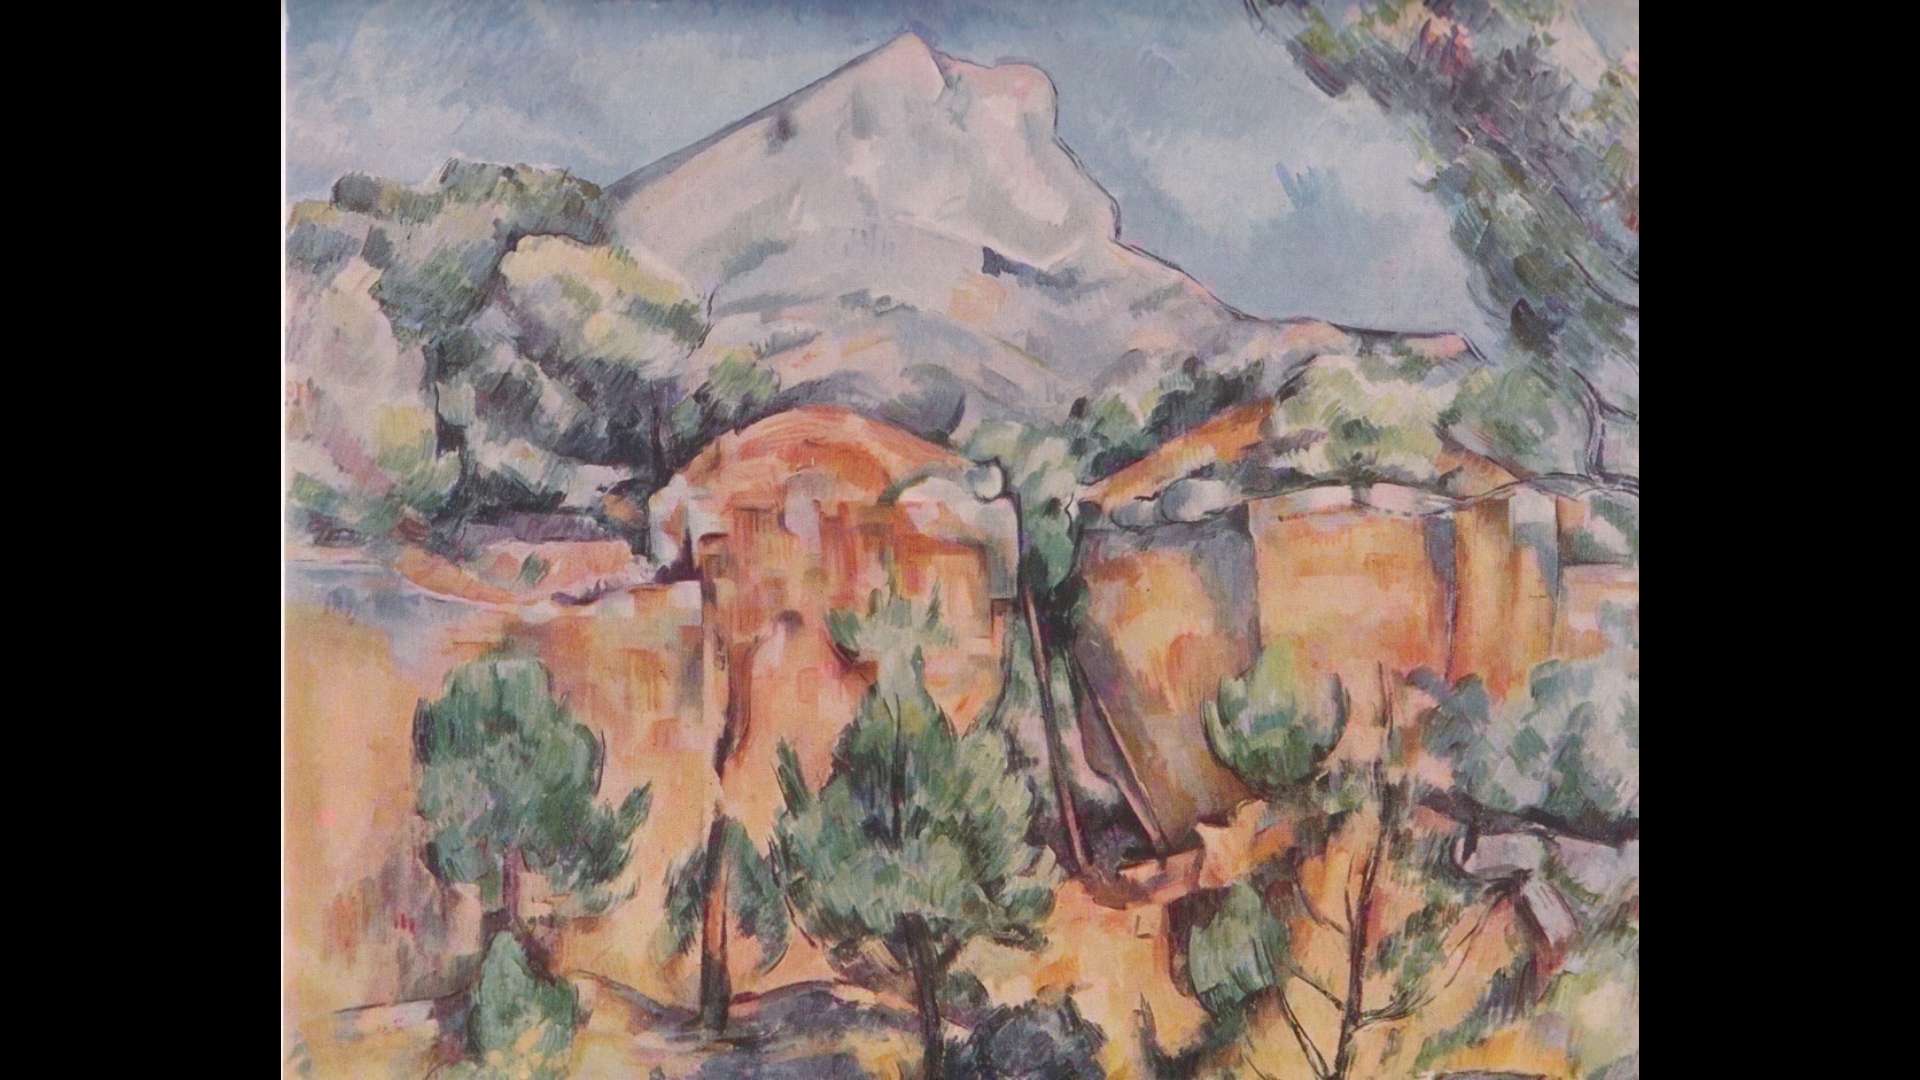 Paul Cézanne. THE MONTAGNE SAINTE-VICTOIRE, as seen from the Bibémus quarries, 1898-1900, oil on canvas, Baltimore Museum of Art. Photography by Mitro Hood.